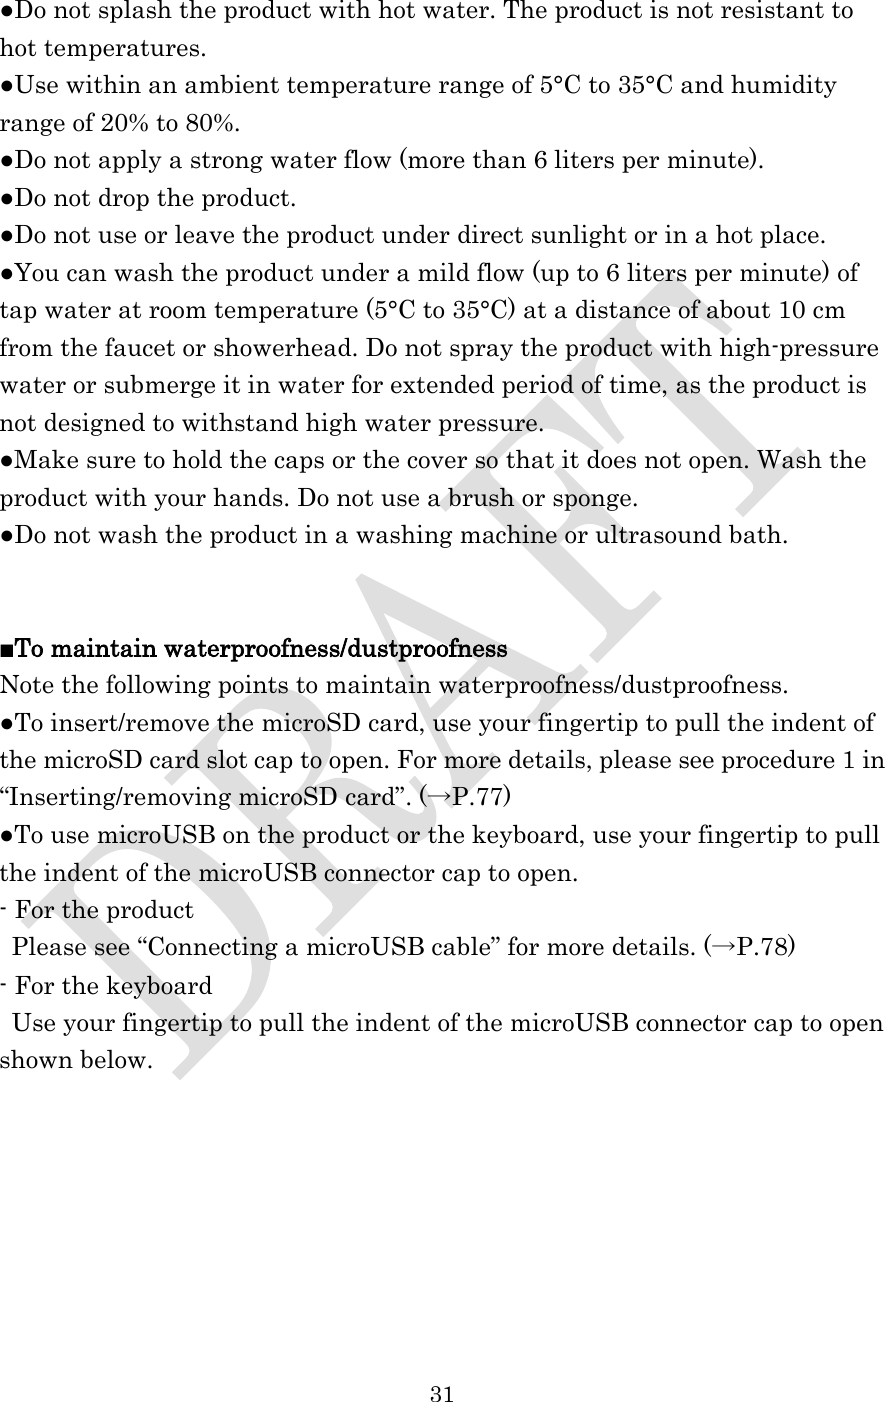  31  ●Do not splash the product with hot water. The product is not resistant to hot temperatures. ●Use within an ambient temperature range of 5°C to 35°C and humidity range of 20% to 80%. ●Do not apply a strong water flow (more than 6 liters per minute). ●Do not drop the product. ●Do not use or leave the product under direct sunlight or in a hot place. ●You can wash the product under a mild flow (up to 6 liters per minute) of tap water at room temperature (5°C to 35°C) at a distance of about 10 cm from the faucet or showerhead. Do not spray the product with high-pressure water or submerge it in water for extended period of time, as the product is not designed to withstand high water pressure.   ●Make sure to hold the caps or the cover so that it does not open. Wash the product with your hands. Do not use a brush or sponge. ●Do not wash the product in a washing machine or ultrasound bath.   ■To maintain waterproofness/dustproofness Note the following points to maintain waterproofness/dustproofness. ●To insert/remove the microSD card, use your fingertip to pull the indent of the microSD card slot cap to open. For more details, please see procedure 1 in “Inserting/removing microSD card”. (→P.77) ●To use microUSB on the product or the keyboard, use your fingertip to pull the indent of the microUSB connector cap to open. - For the product Please see “Connecting a microUSB cable” for more details. (→P.78) - For the keyboard  Use your fingertip to pull the indent of the microUSB connector cap to open shown below. 